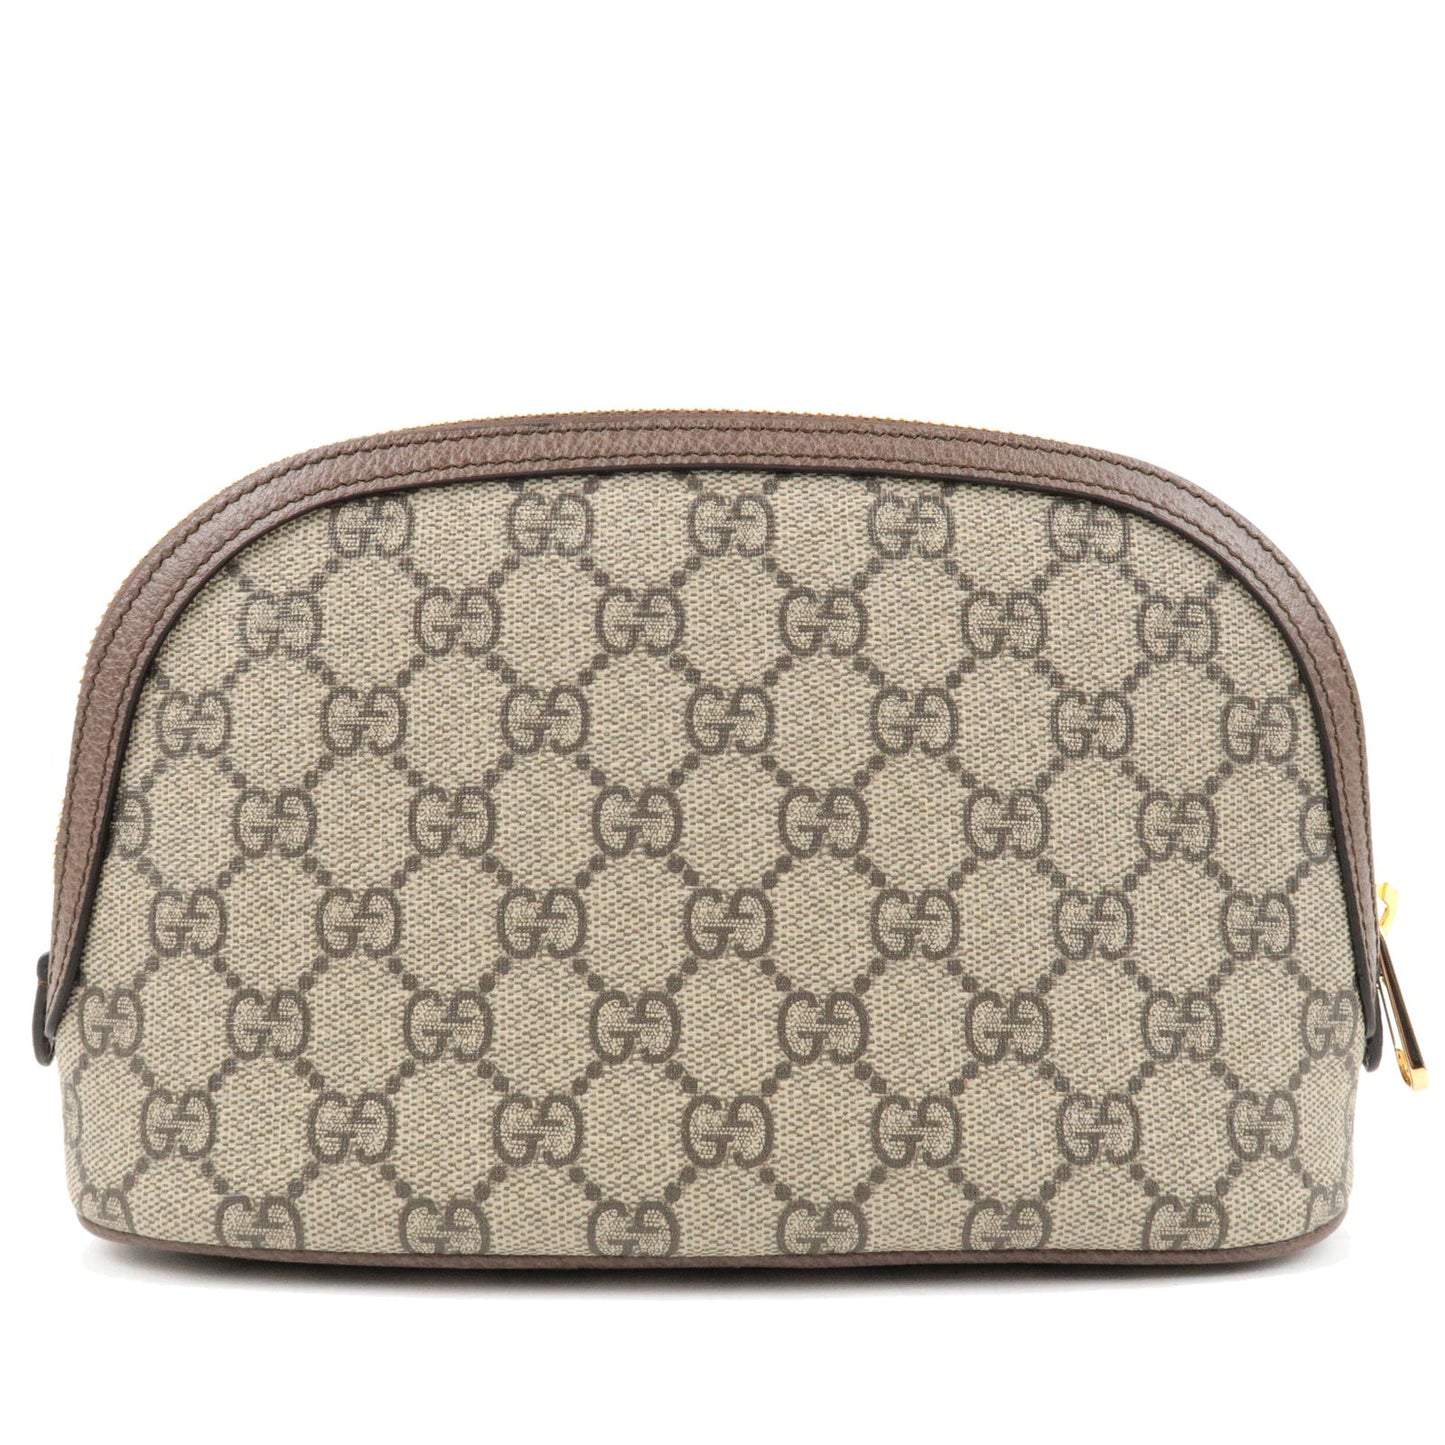 GUCCI Sherry Ophidia GG Supreme Leather Pouch Brown 625551